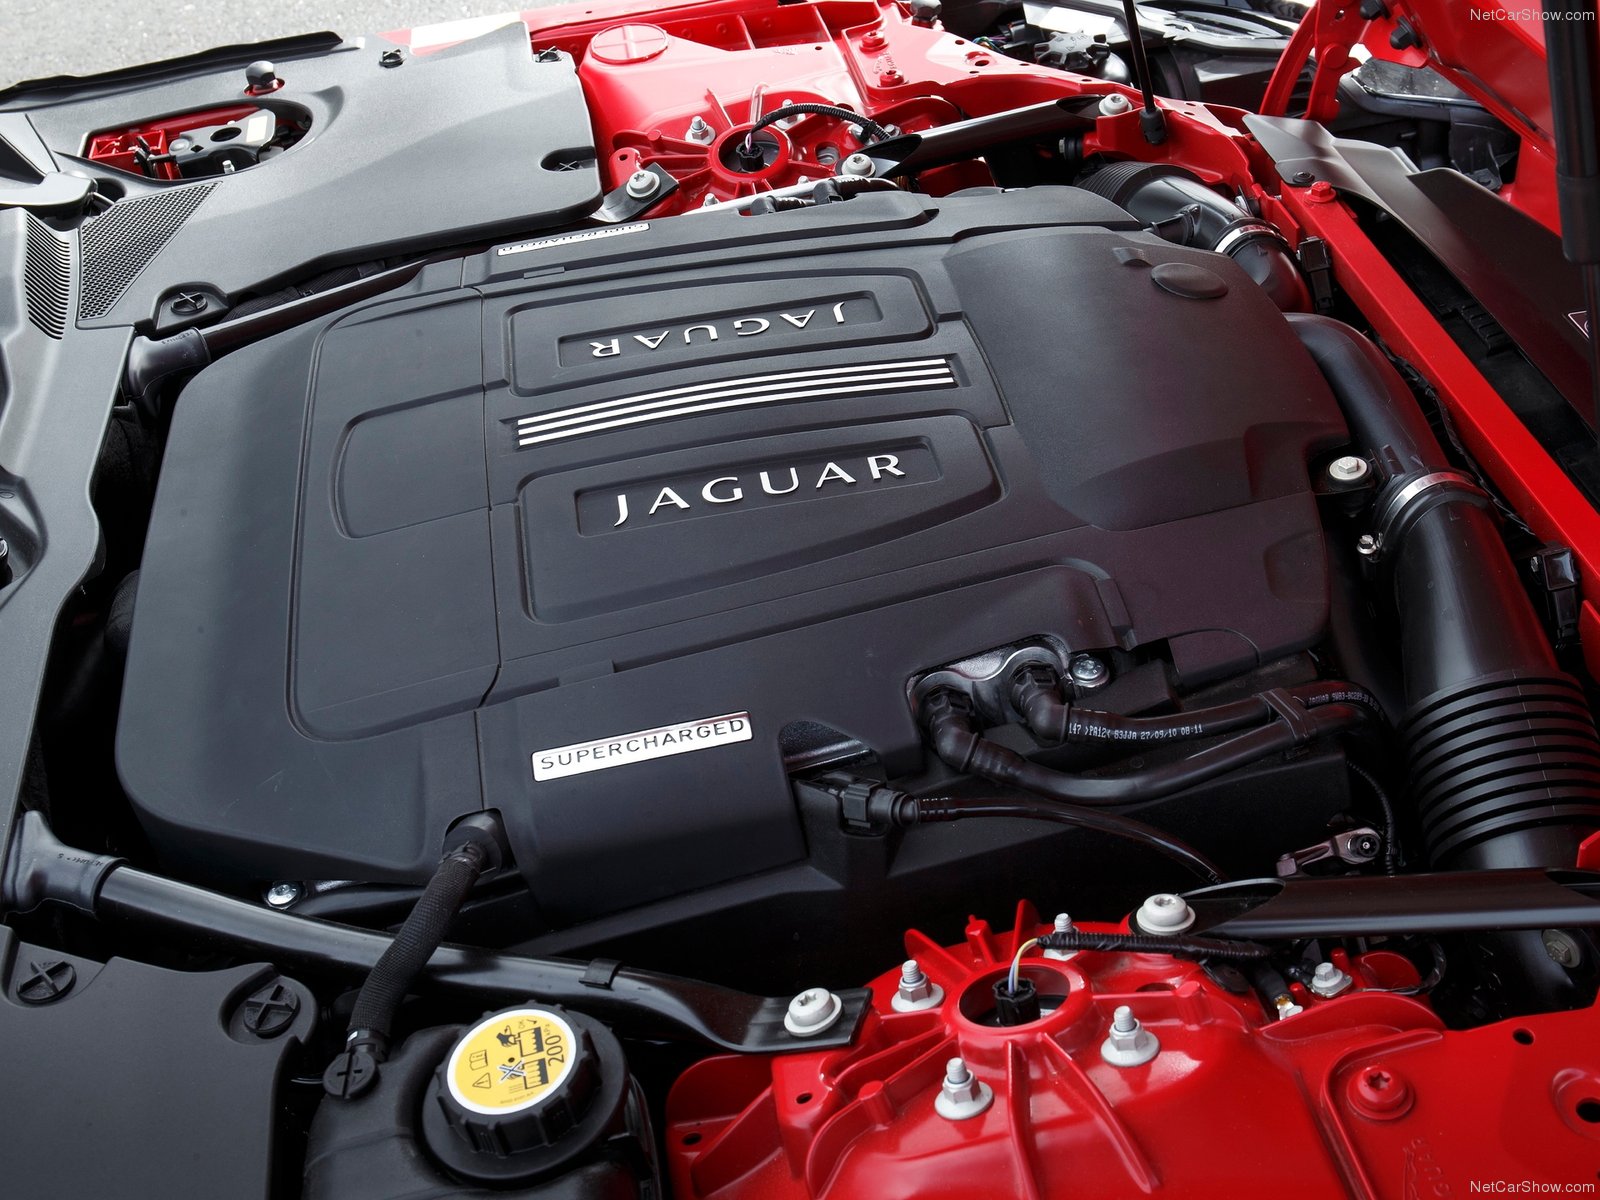 2014 Jaguar F Type V8 S Review Spec Release Date Picture and Price